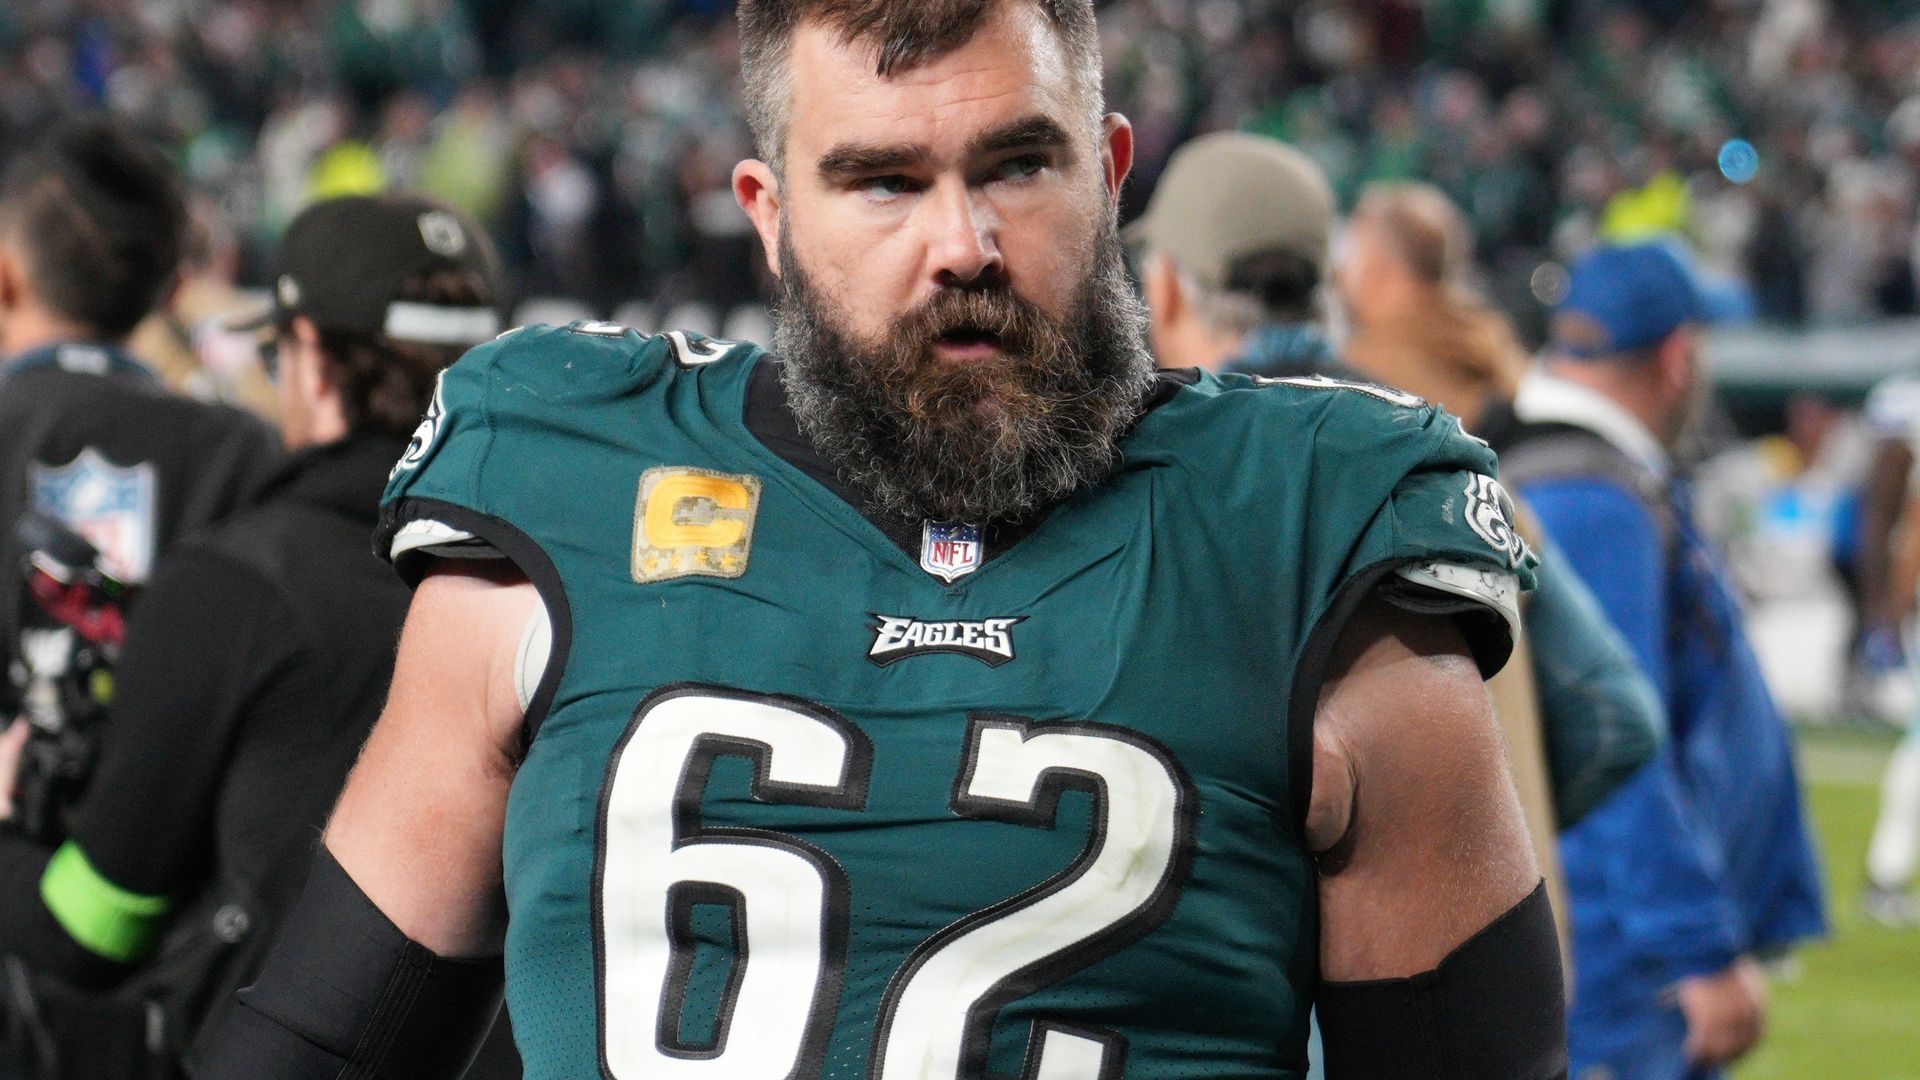 Philadelphia Eagles center Jason Kelce (62) looks on during the game between the Dallas Cowboys and the Philadelphia Eagles on November 5, 2023 at Lincoln Financial Field. (Photo by Andy Lewis/Icon Sportswire via Getty Images)